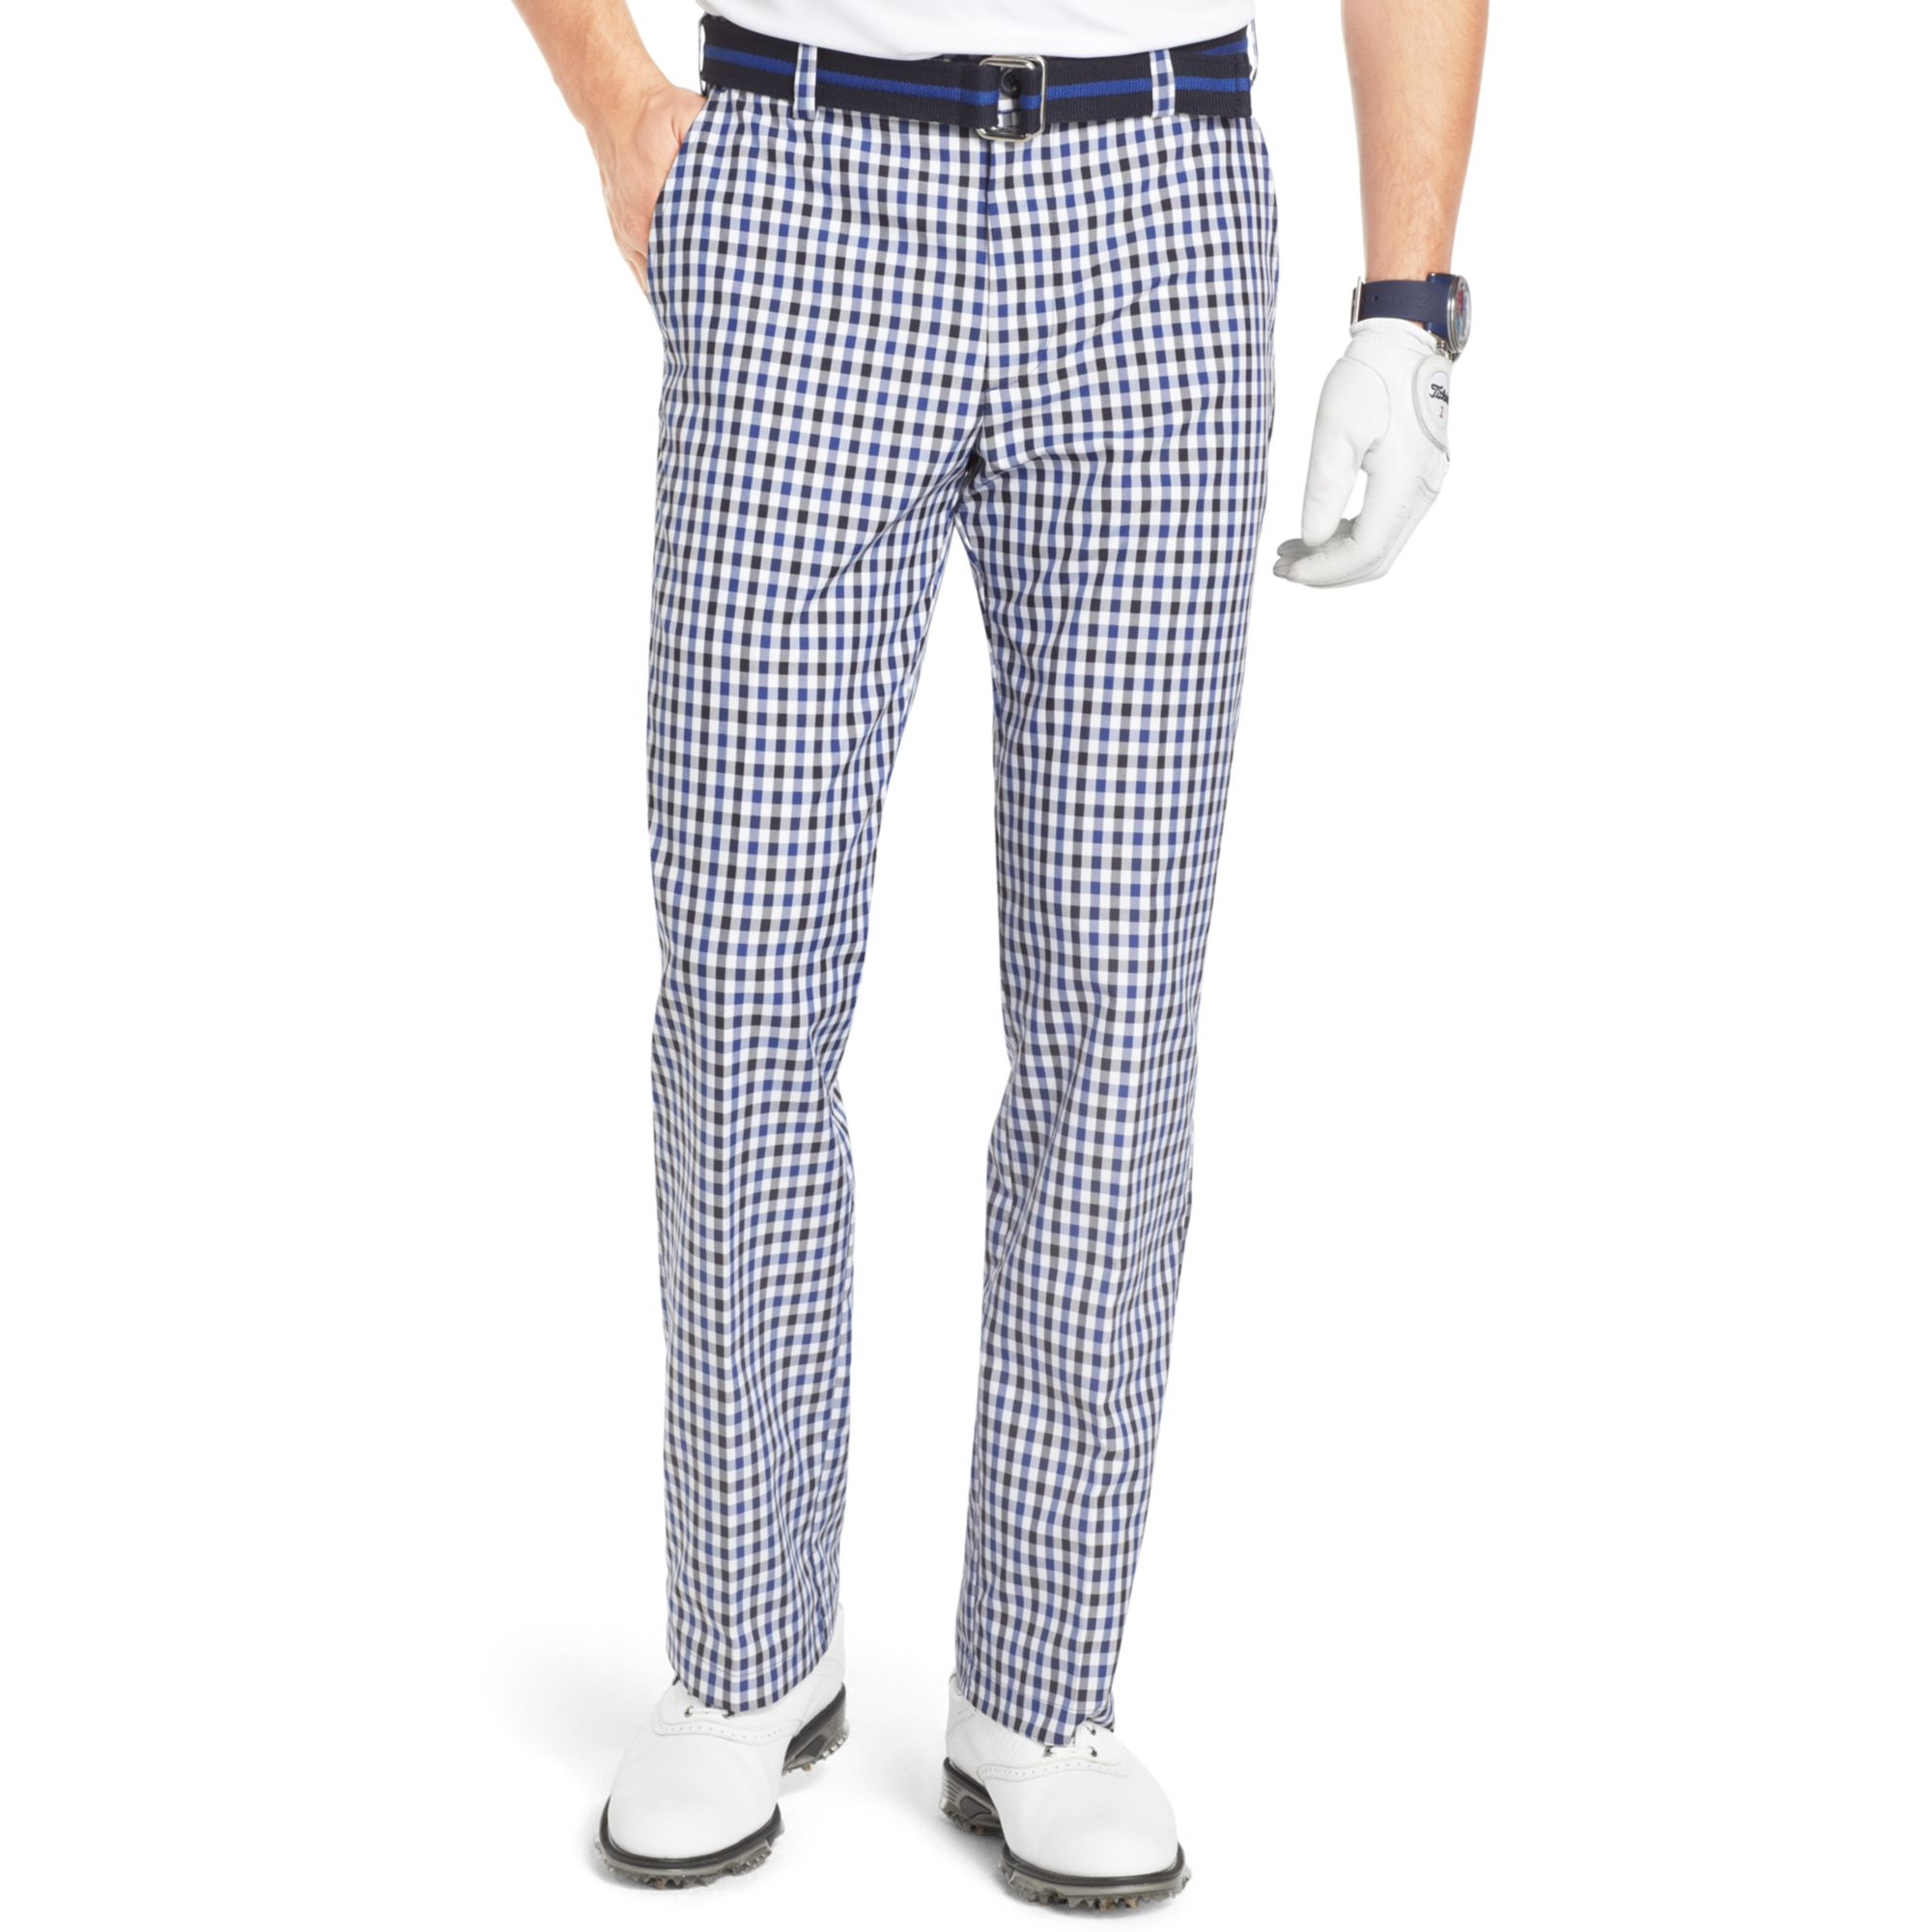 Izod Flat Front Gingham Check Performance Golf Pants in Blue for Men - Lyst